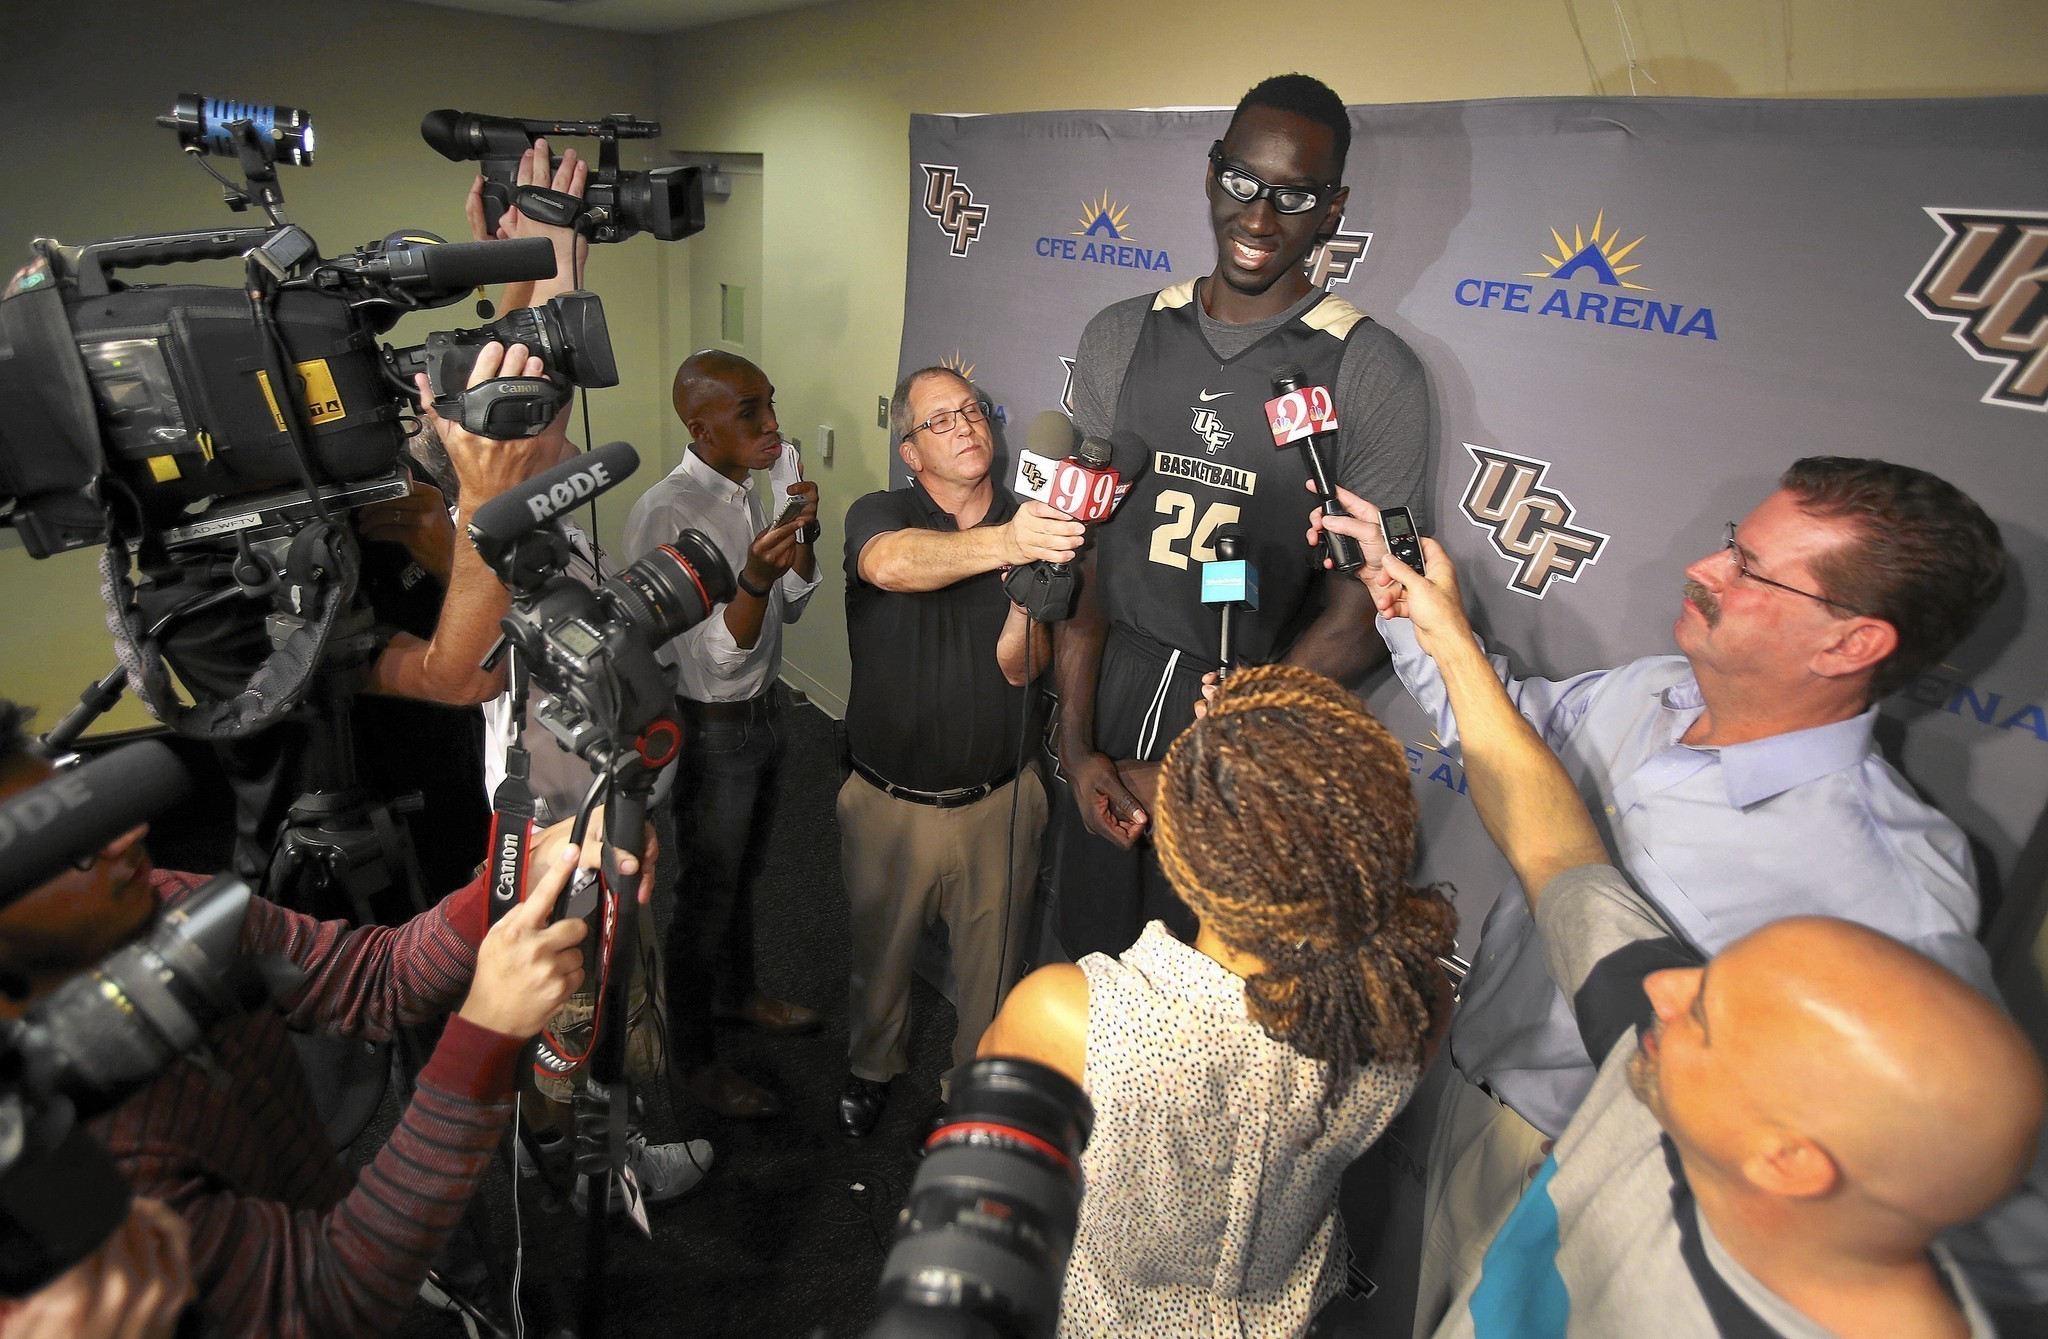 Tacko Fall more confident, focused on UCF basketball after passing on